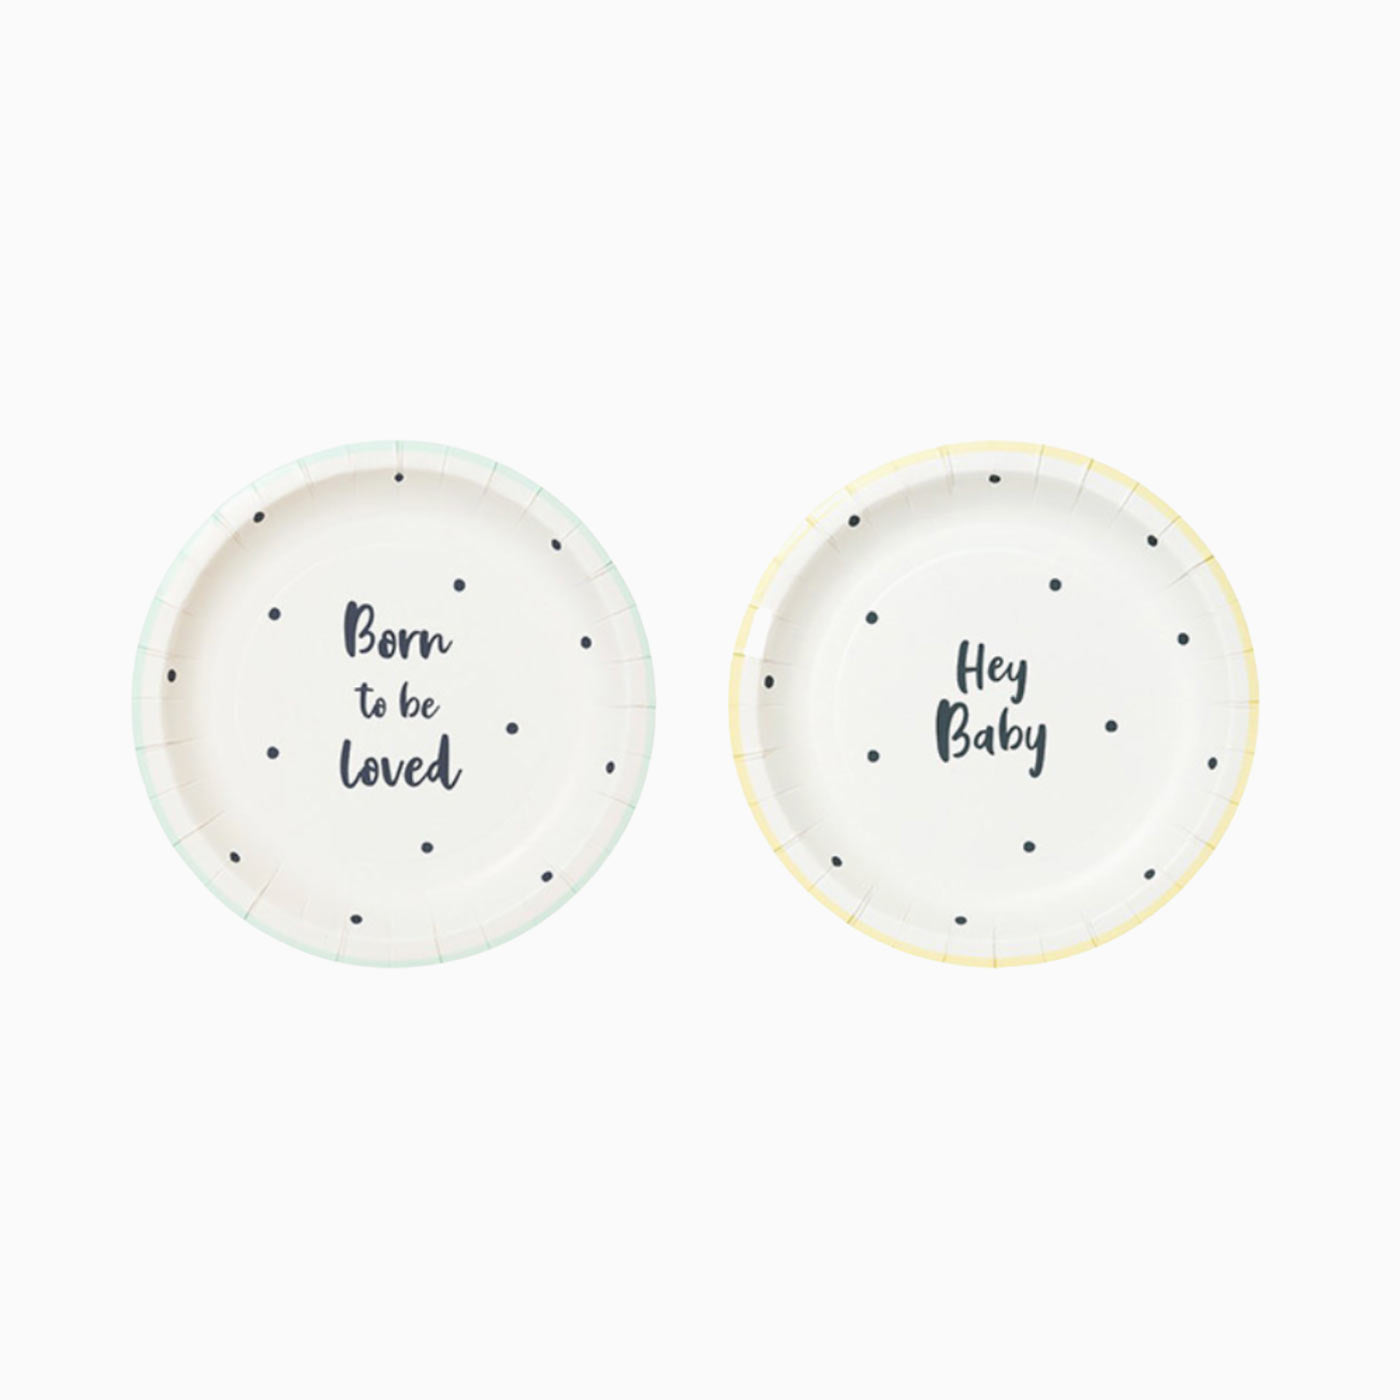 Platos "Born to be Loved" & "Hey Baby" / Pack 12 uds